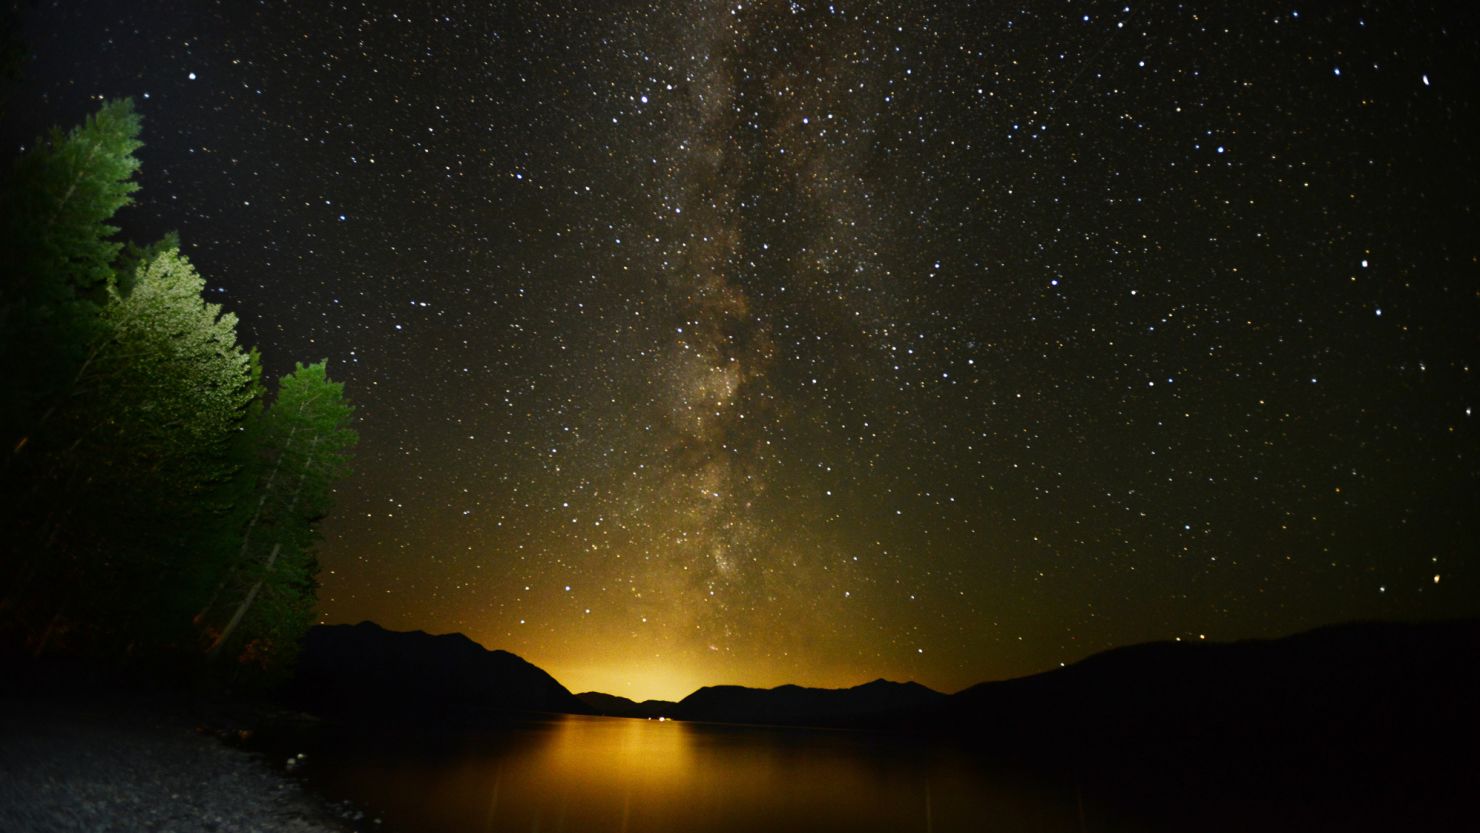 The Milky Way lights up the sky just after 3 a.m. on Thursday, July 18, 2013 over Lake McDonald in Glacier National Park, Montana.